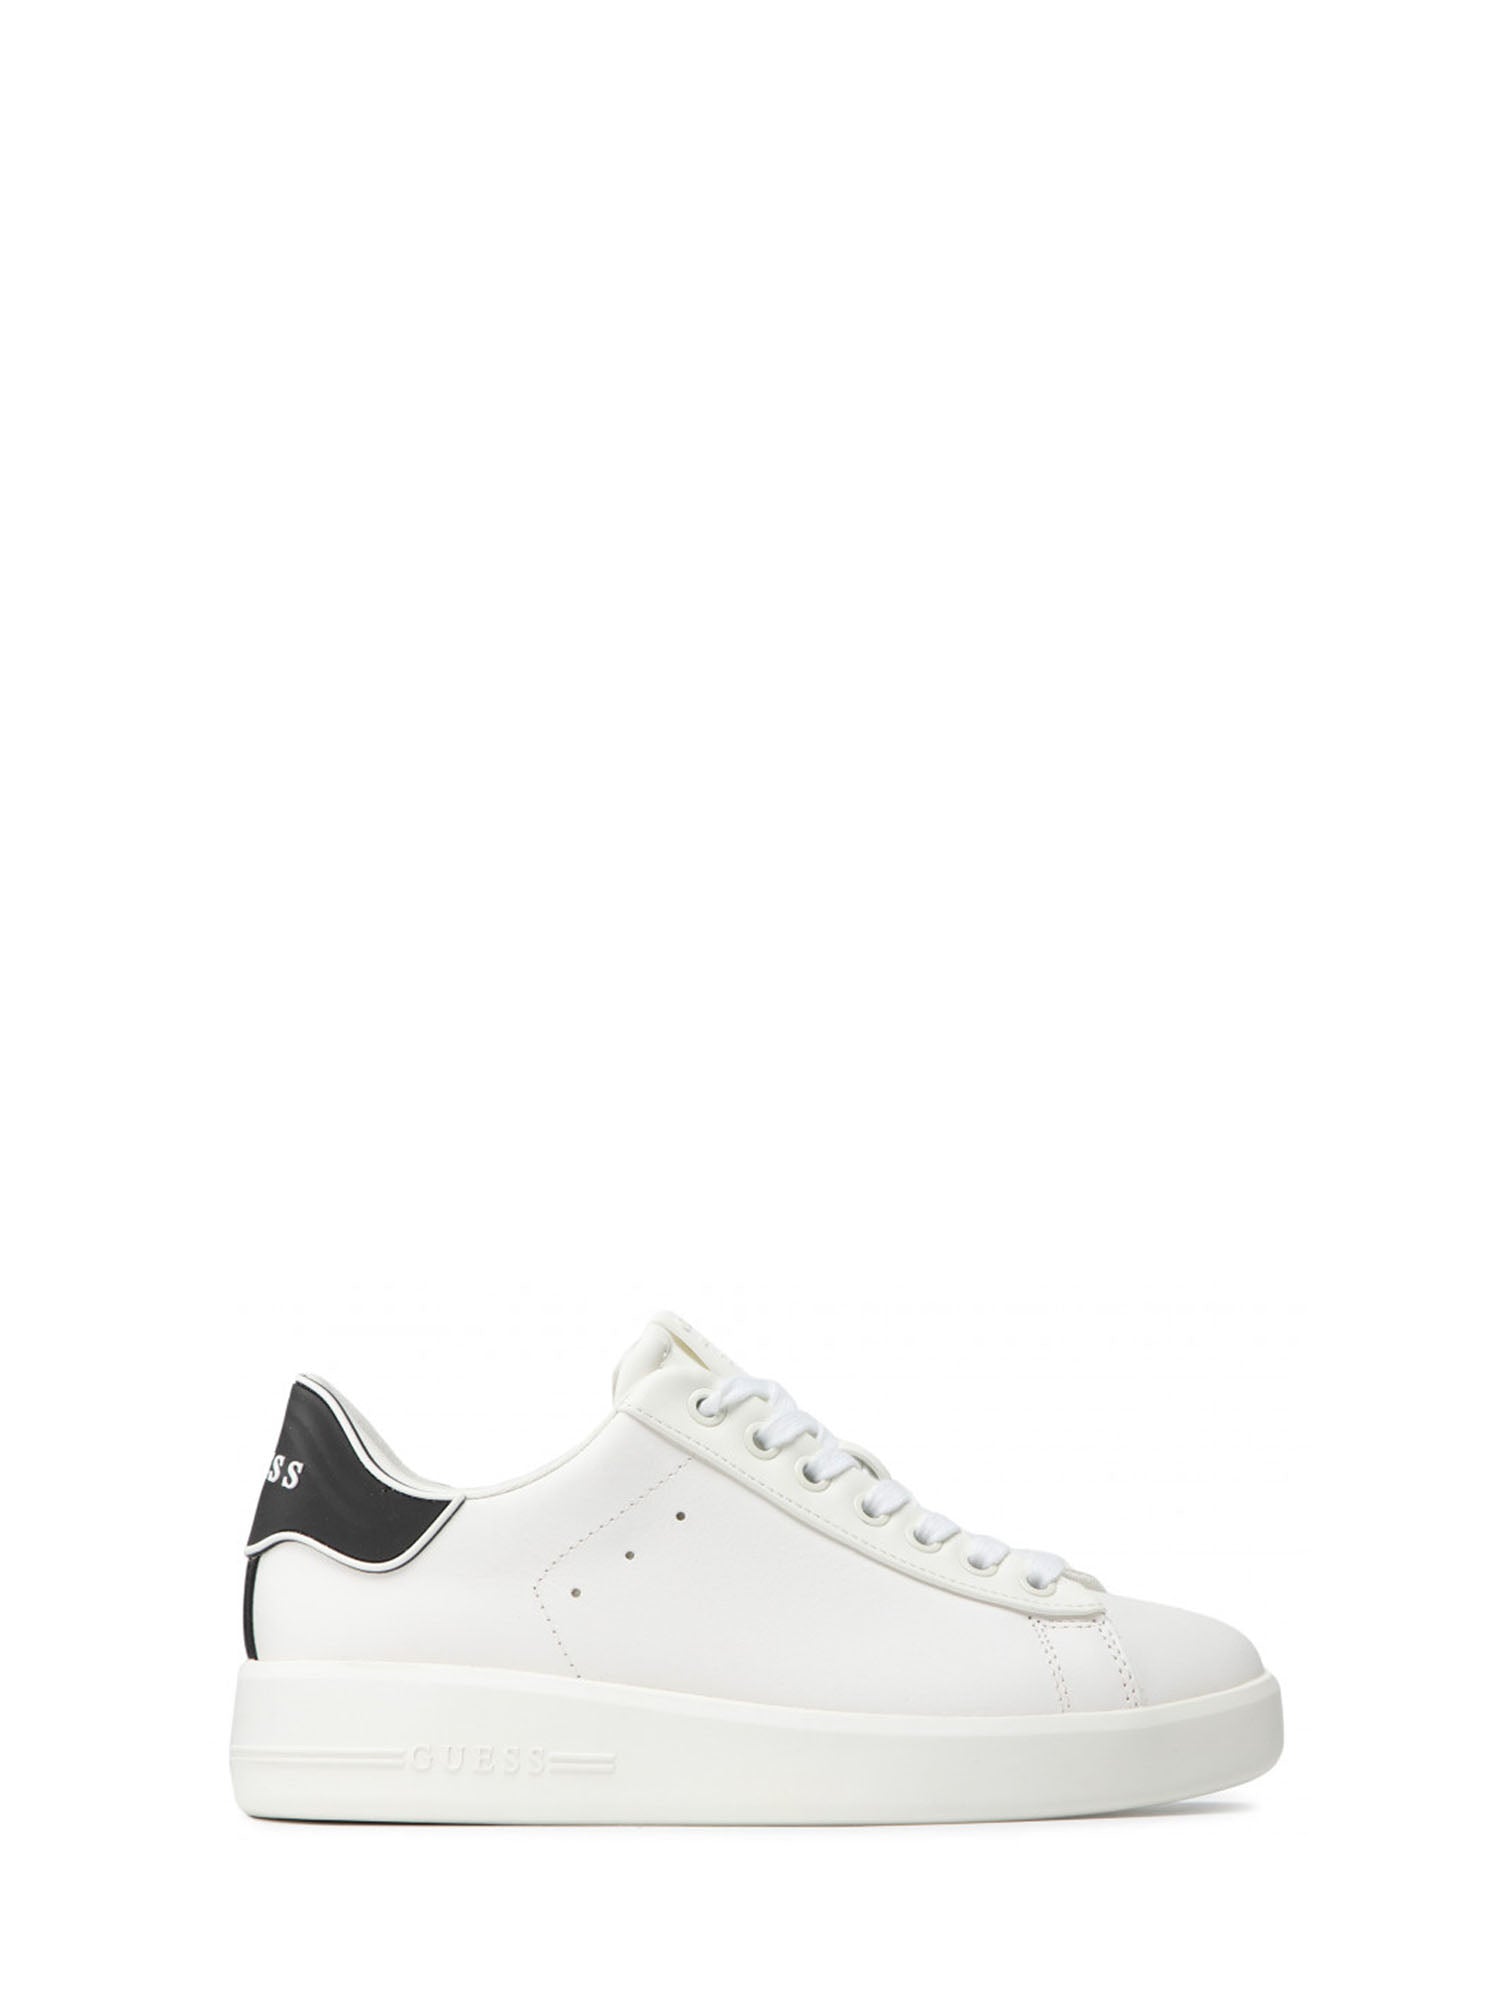 GUESS JEANS SNEAKERS ROCKIES BIANCO - NERO